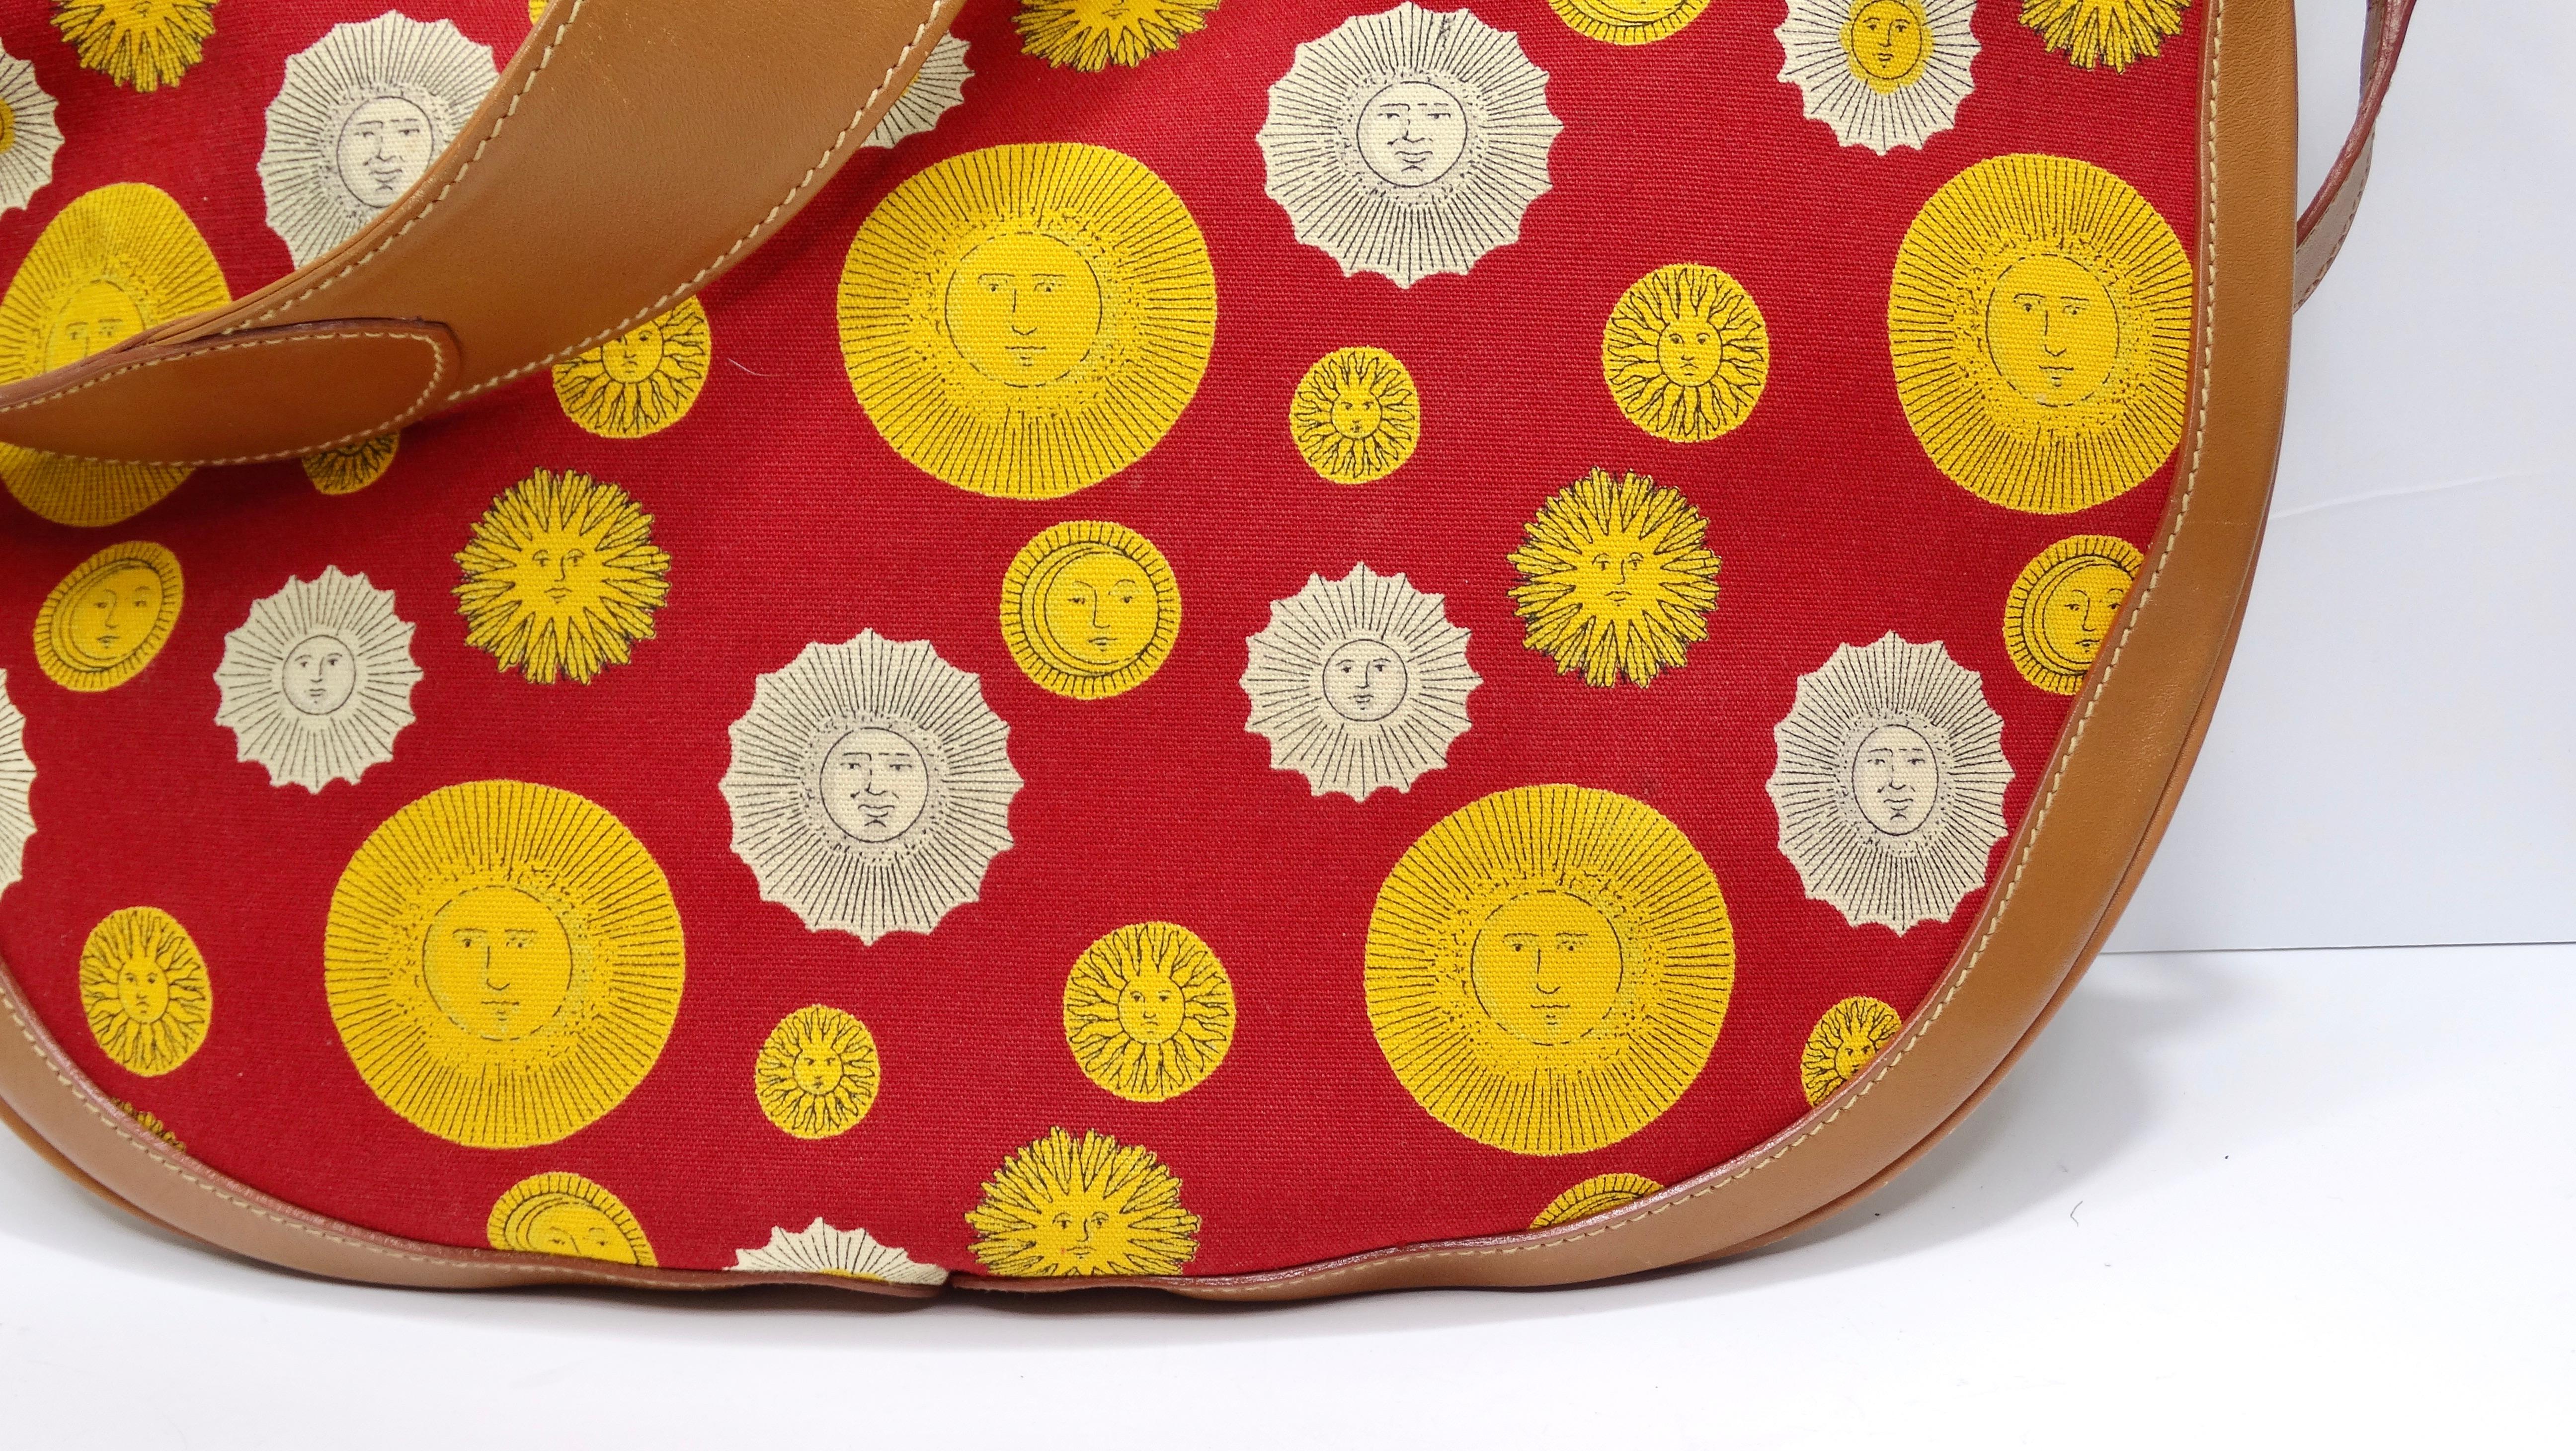 Your new summer bag is giving us Fornasetti vibes! Take a step back in time with this super fun and funky messenger bag from the house of Gucci. The exterior features a canvas sun print in red, cream, and red with rich brown leather detailing, gold